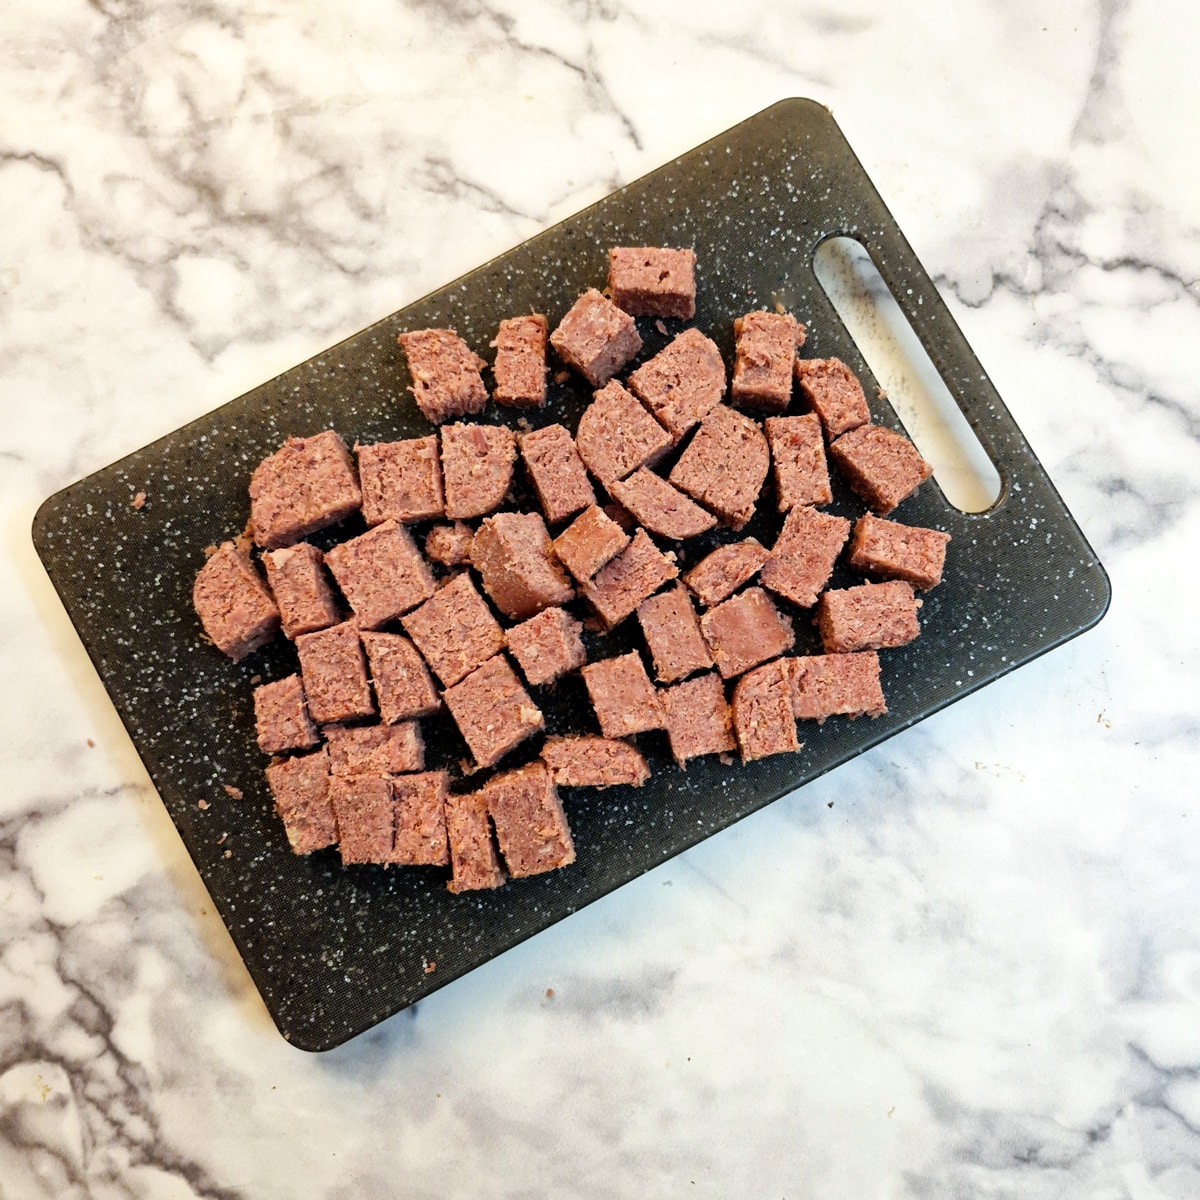 Pieces of corned beef on a chopping board.